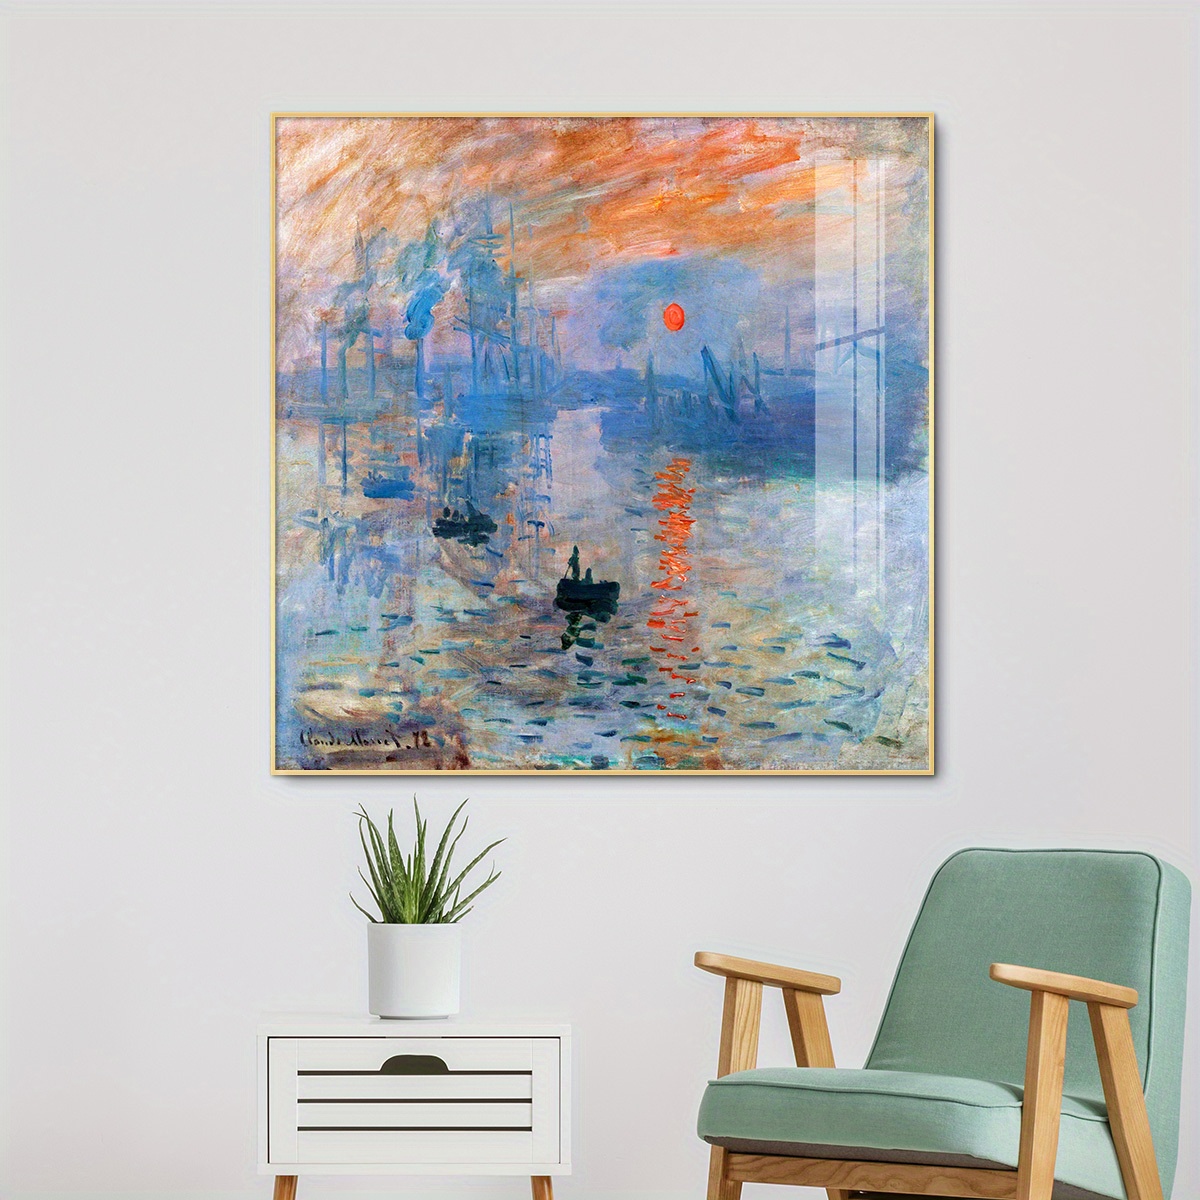 

1pc Framed Canvas Printing Wall Art, Abstract Impression, Sunrise (1872) By Claude Monet's, Wall Art With Waterproof Wooden Back, For Home Room Office Hotel Cafe Ktv Bar Wall Decoration